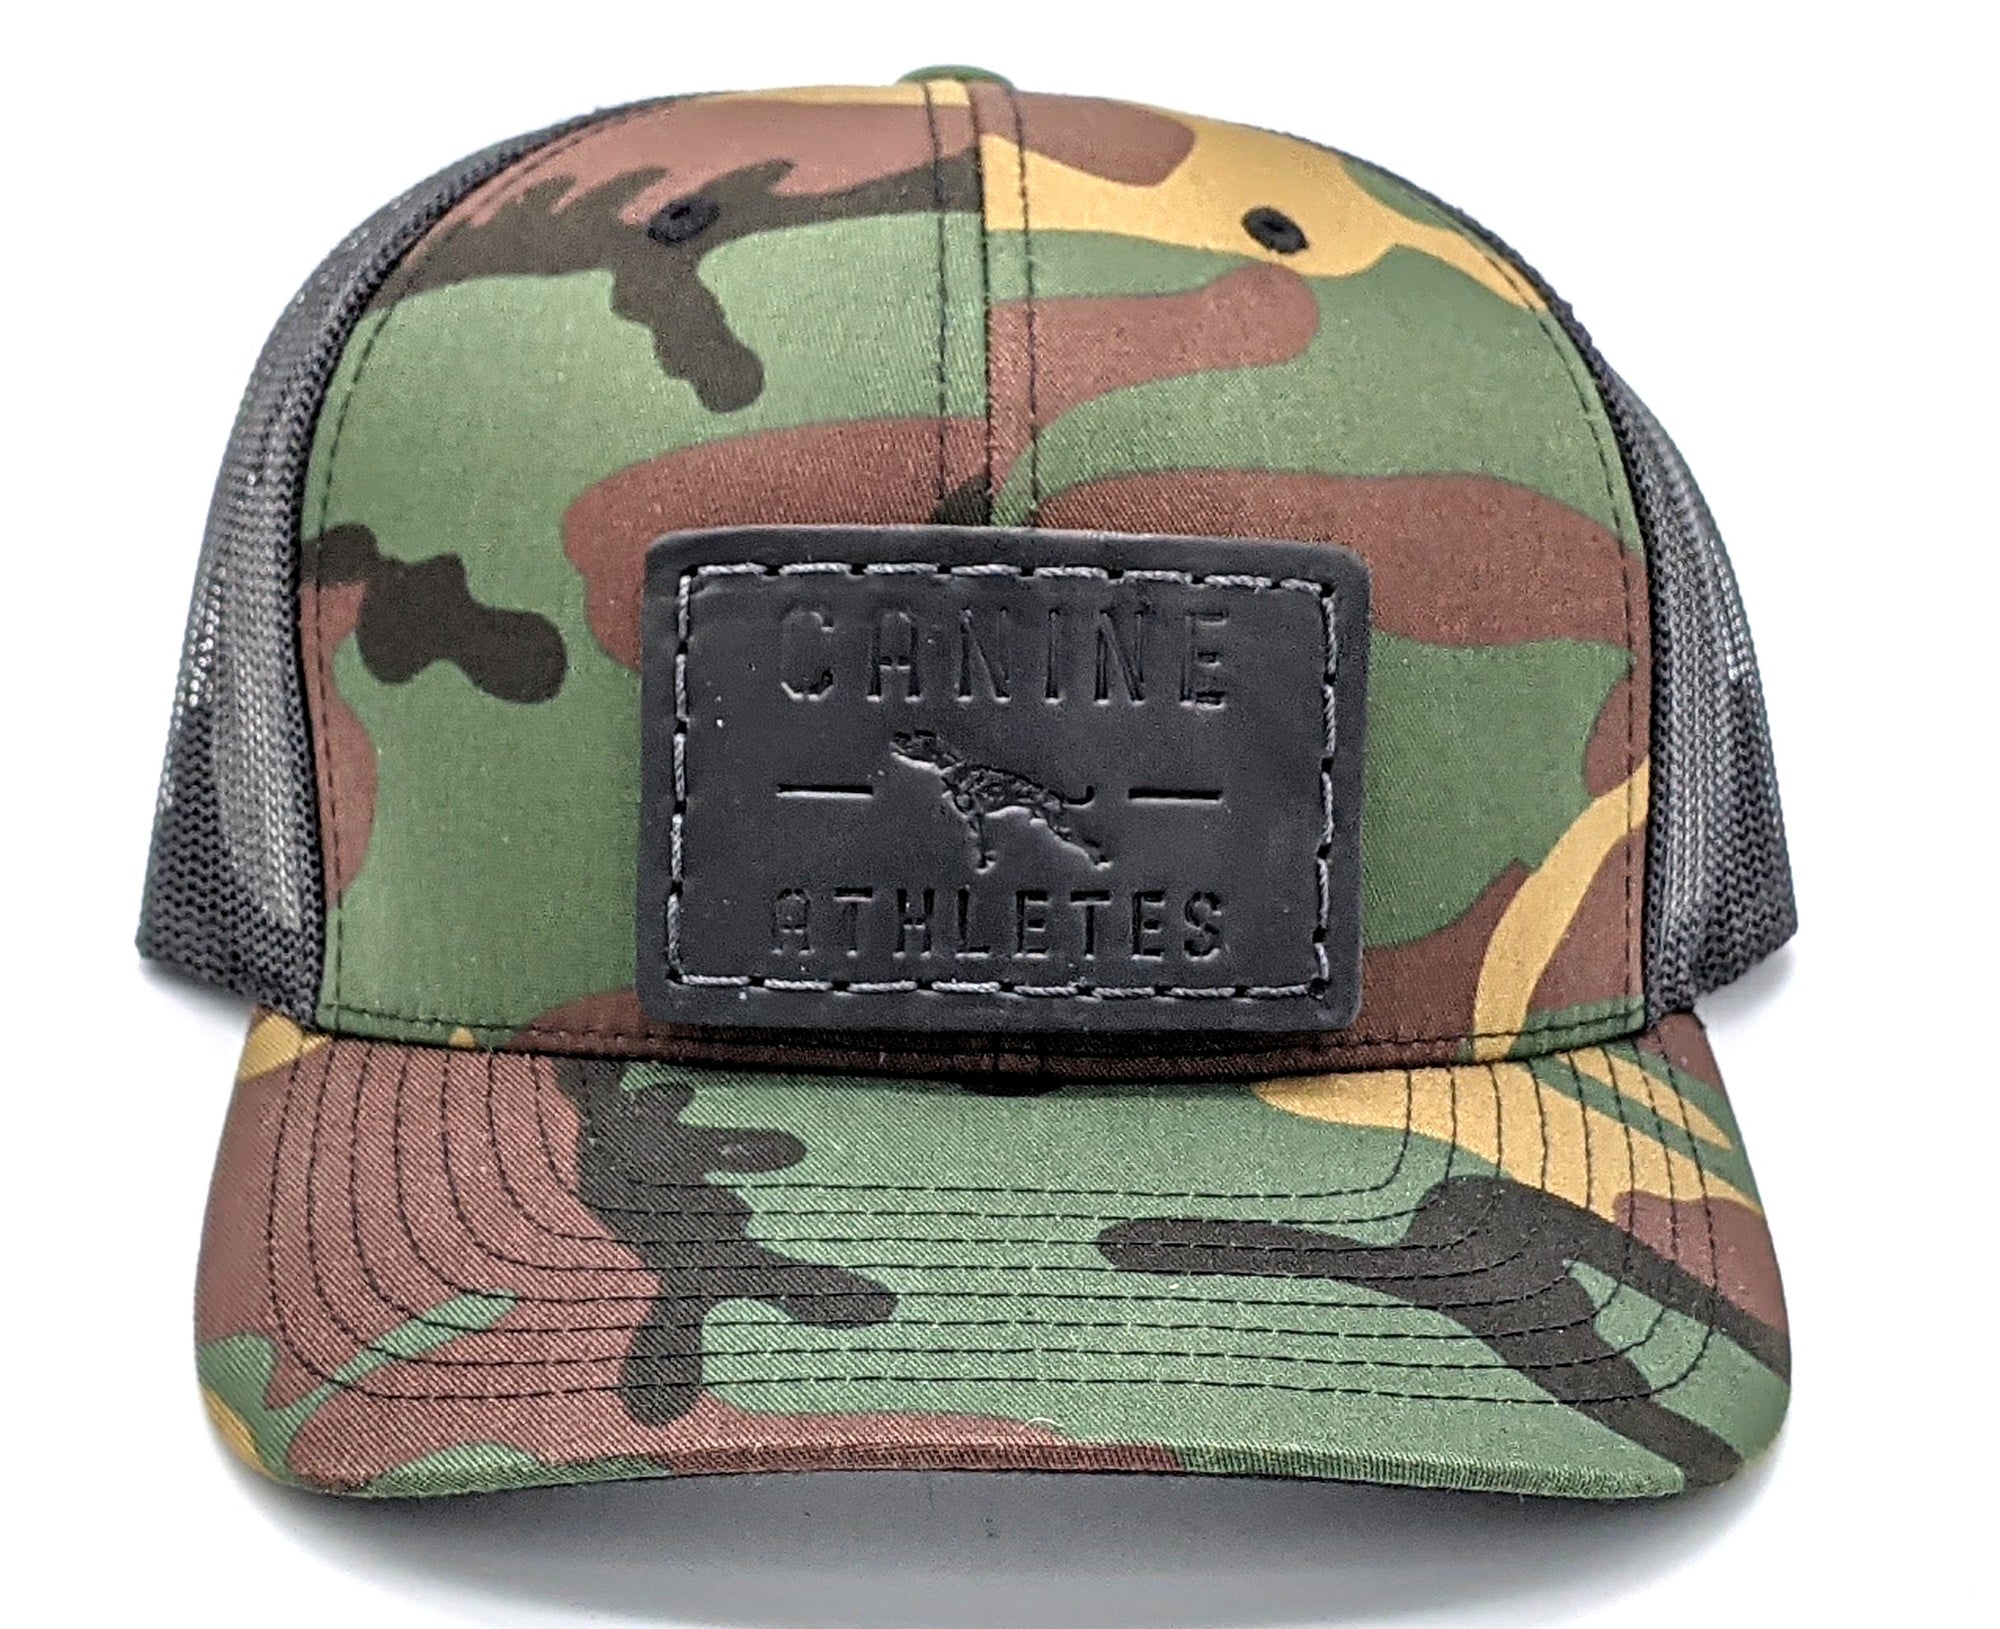 Canine Athletes x TGR Leather Patch Woodland Camo Snapback Trucker Hat